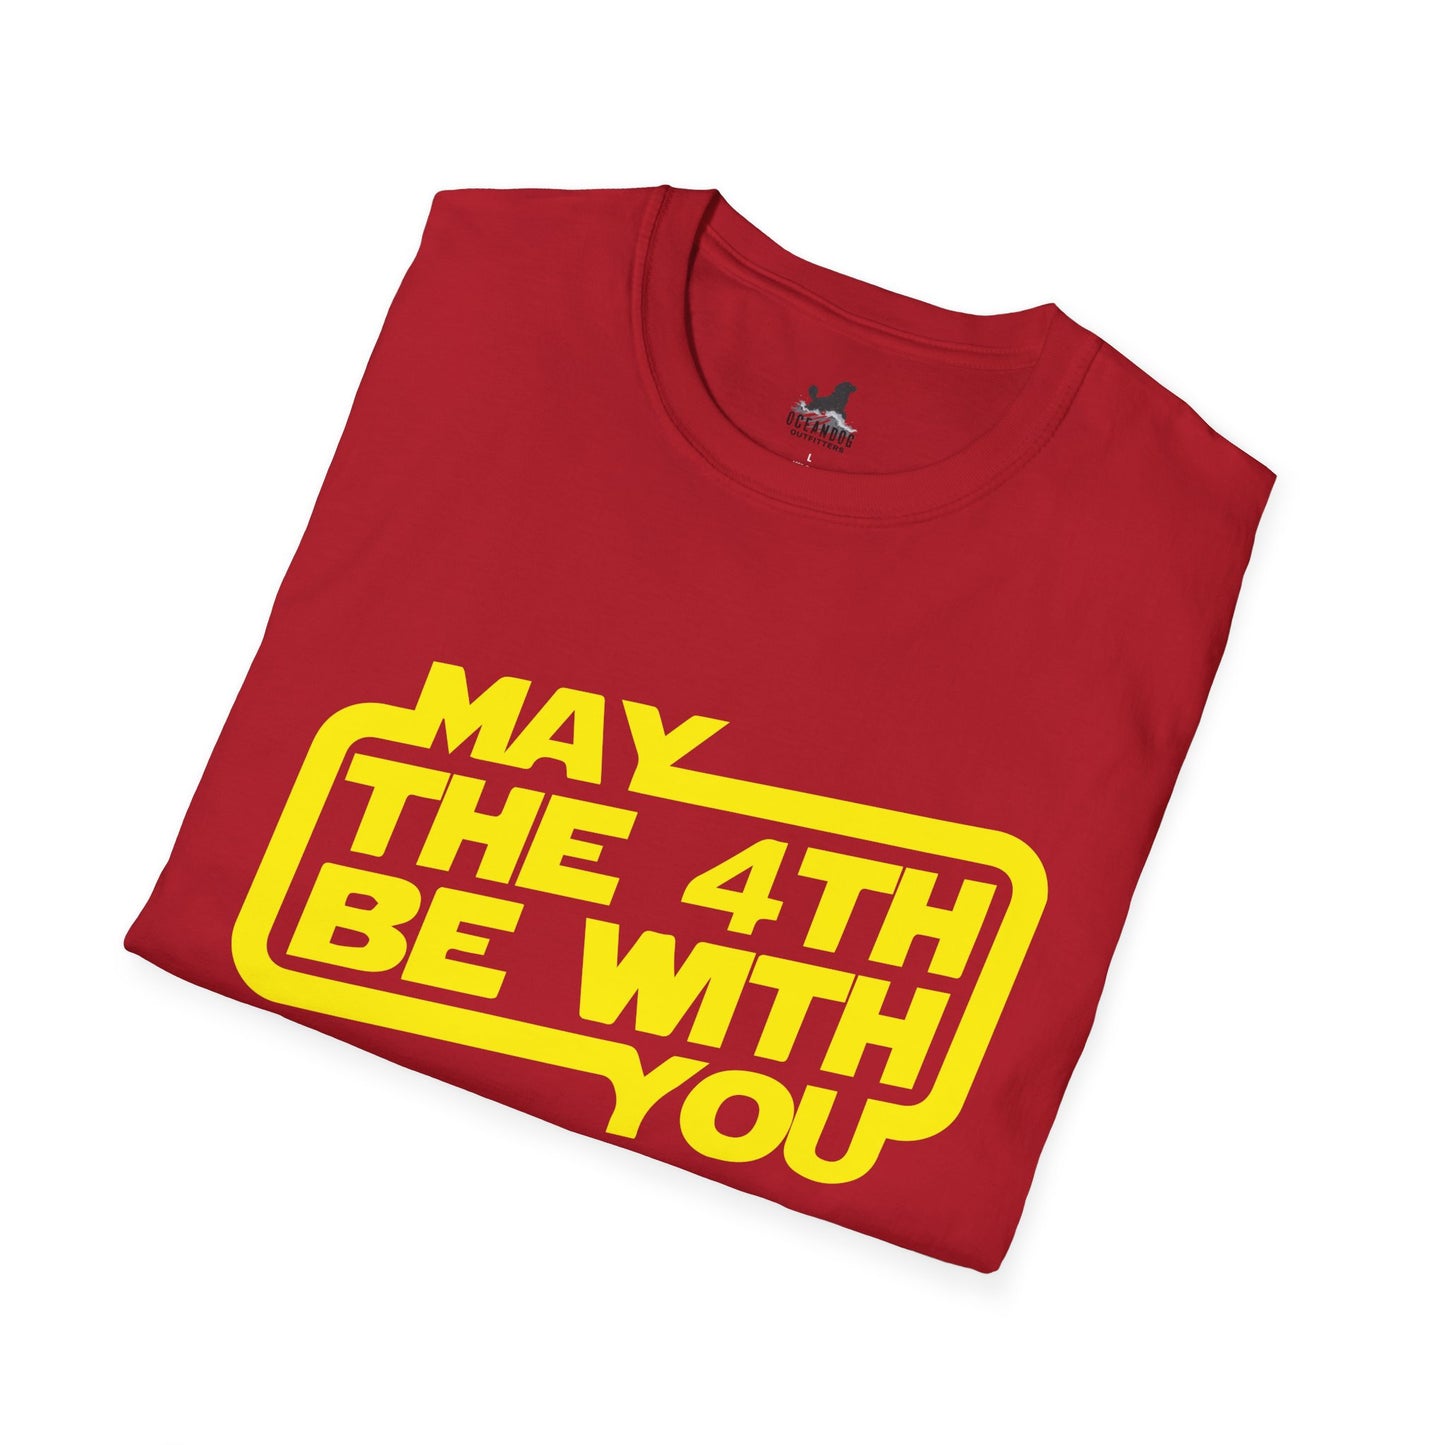 May the 4th Be With You  T-Shirt